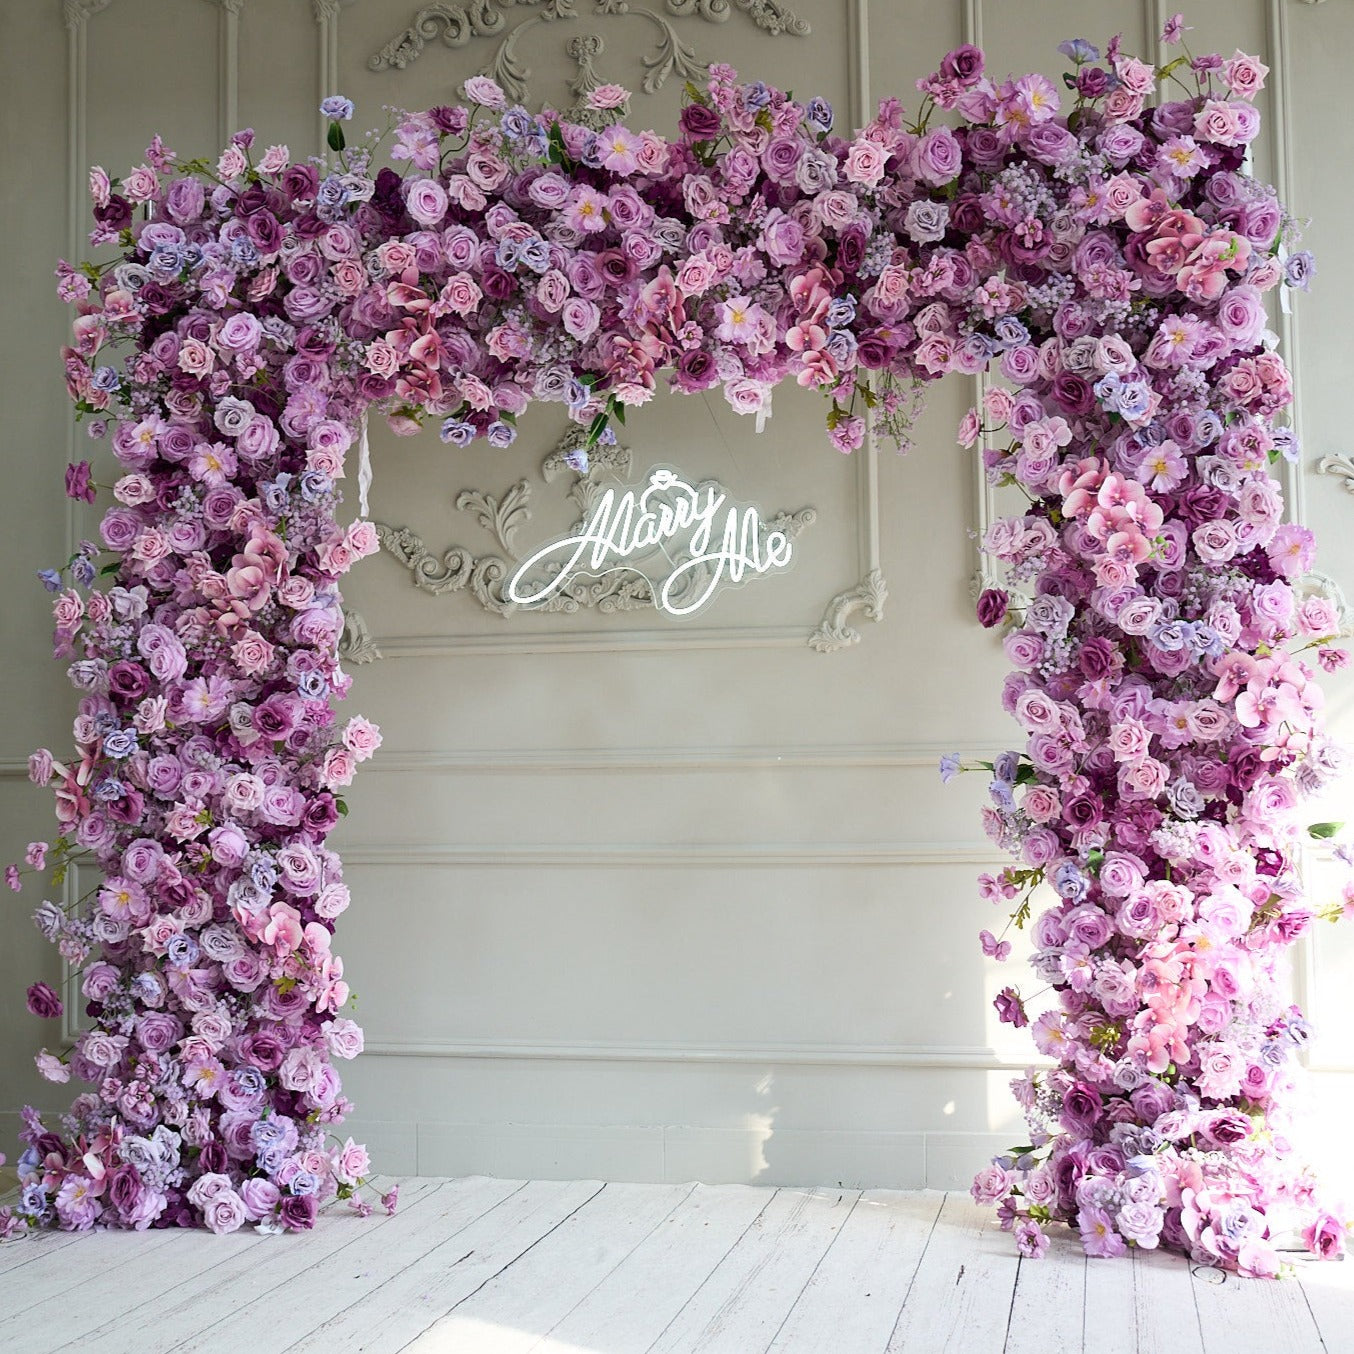 The purple roses florals flower wall looks elegant and romantic.